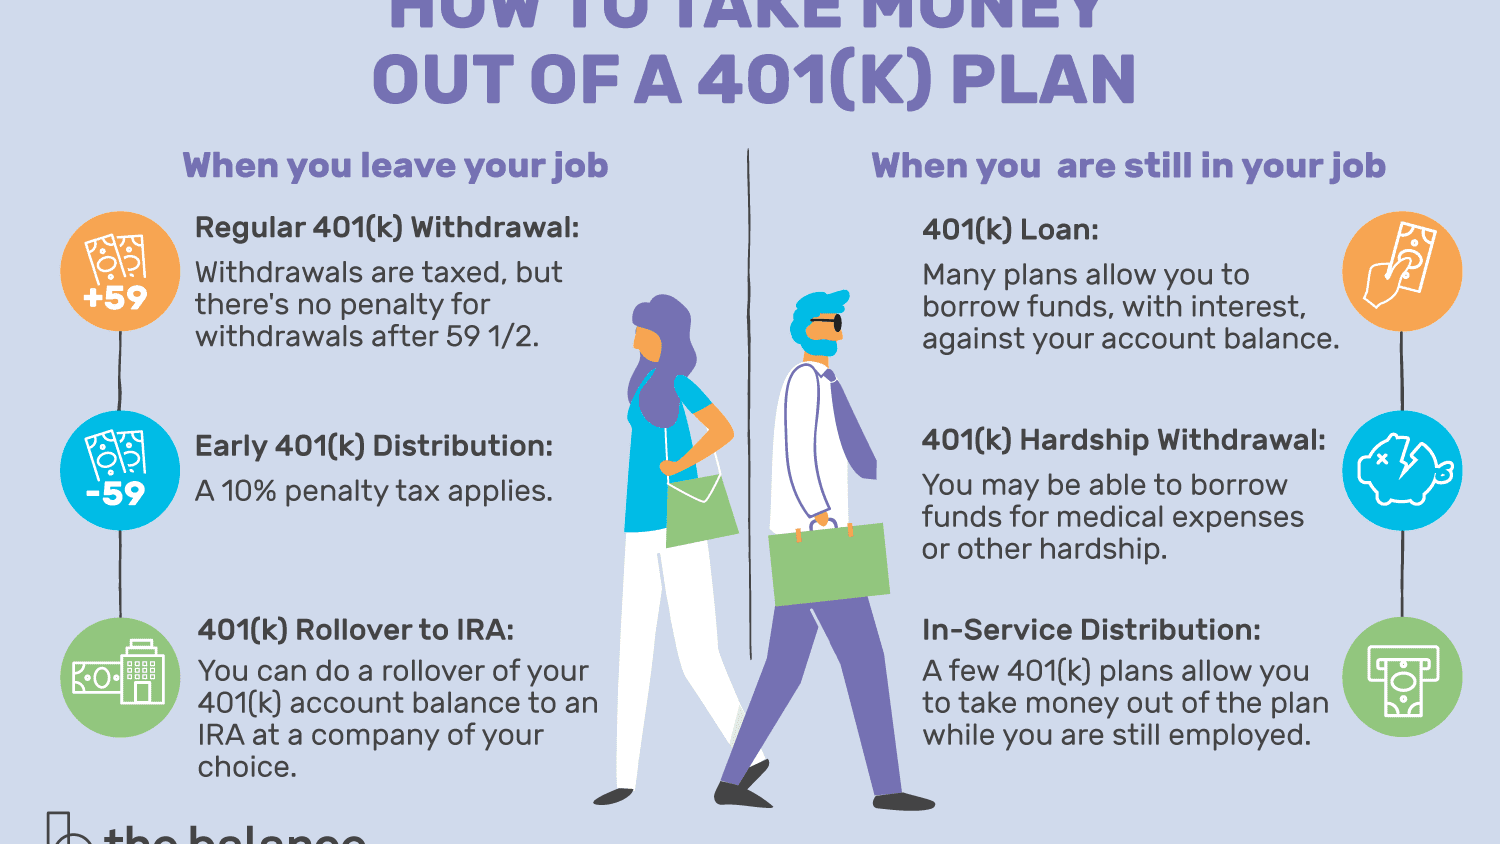 How Do I Cash Out My 401k After Being Fired 401kInfoClub